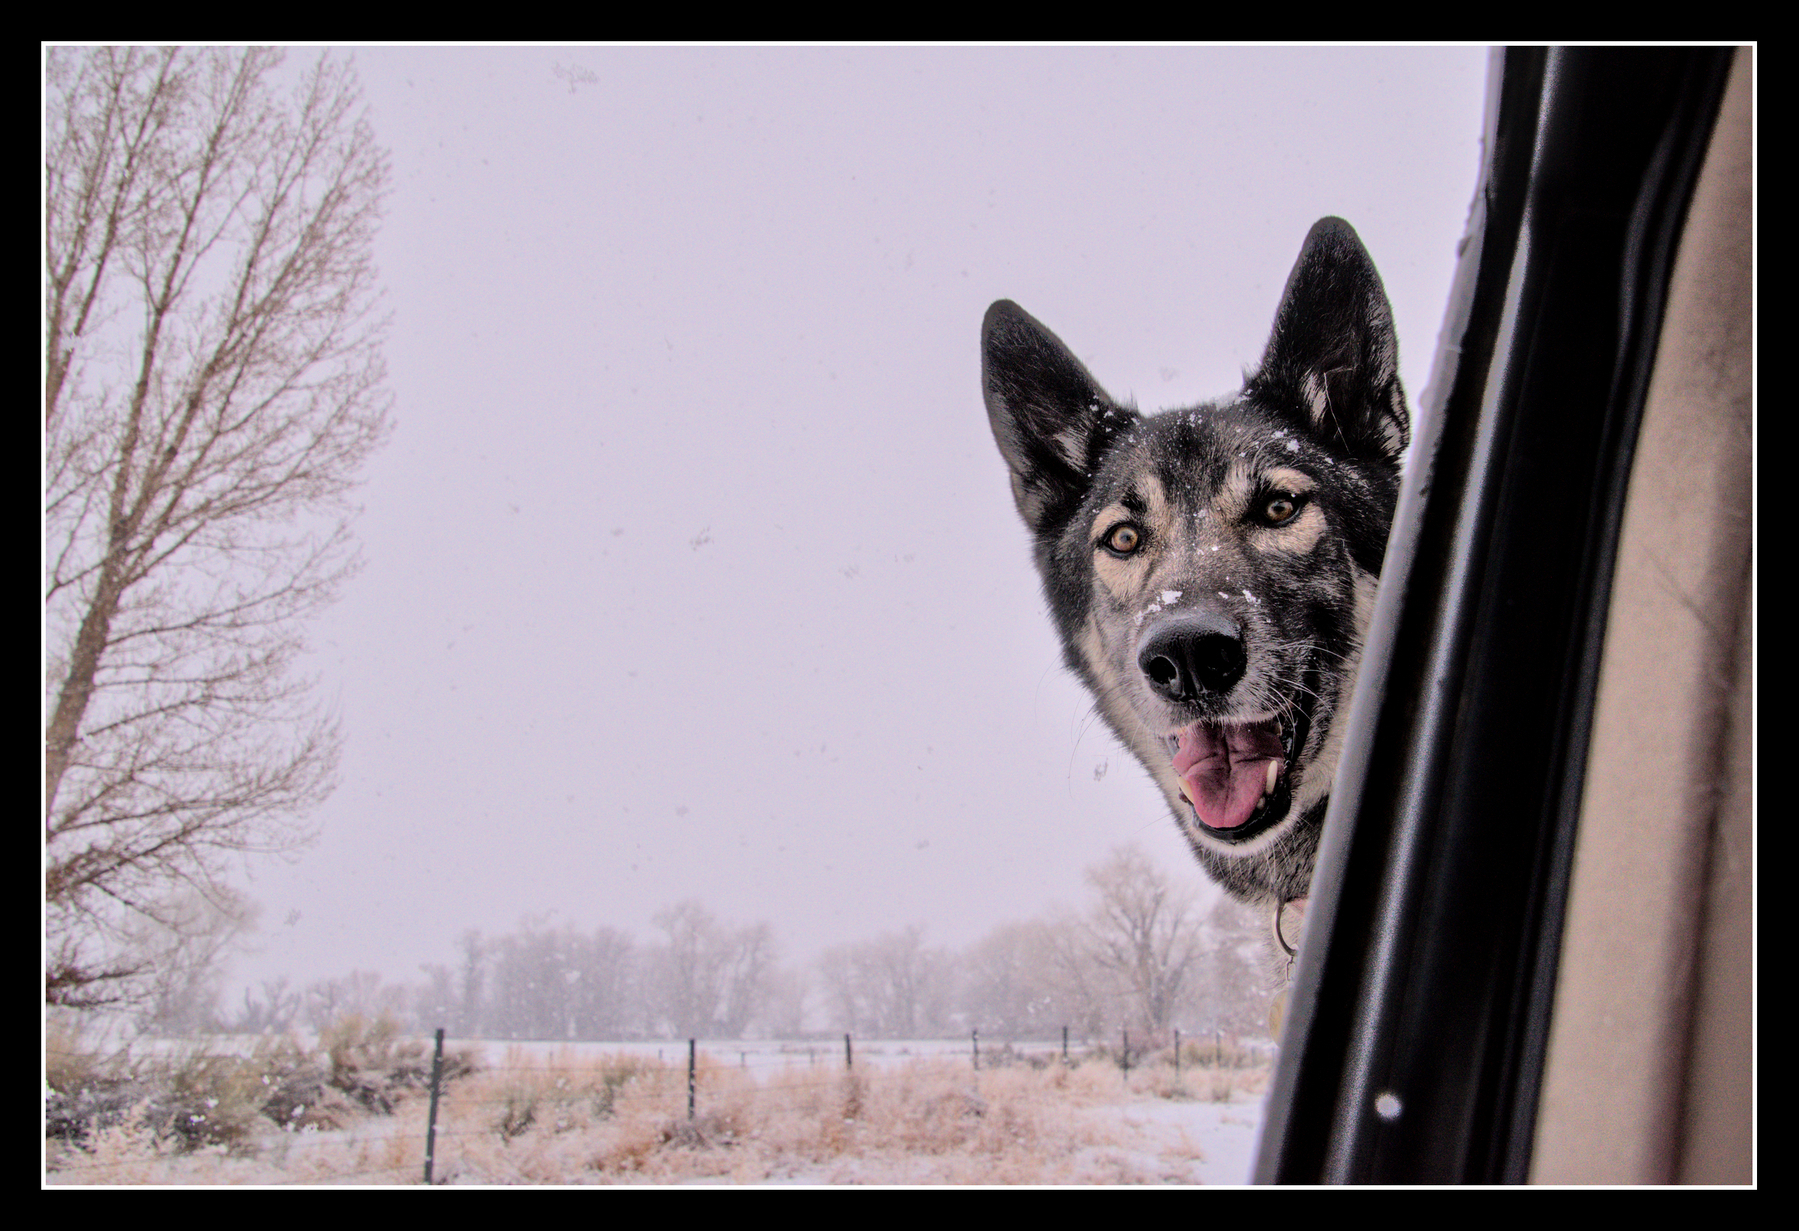 A dog looks very excited with its head out the window in the middle of snowstorm.